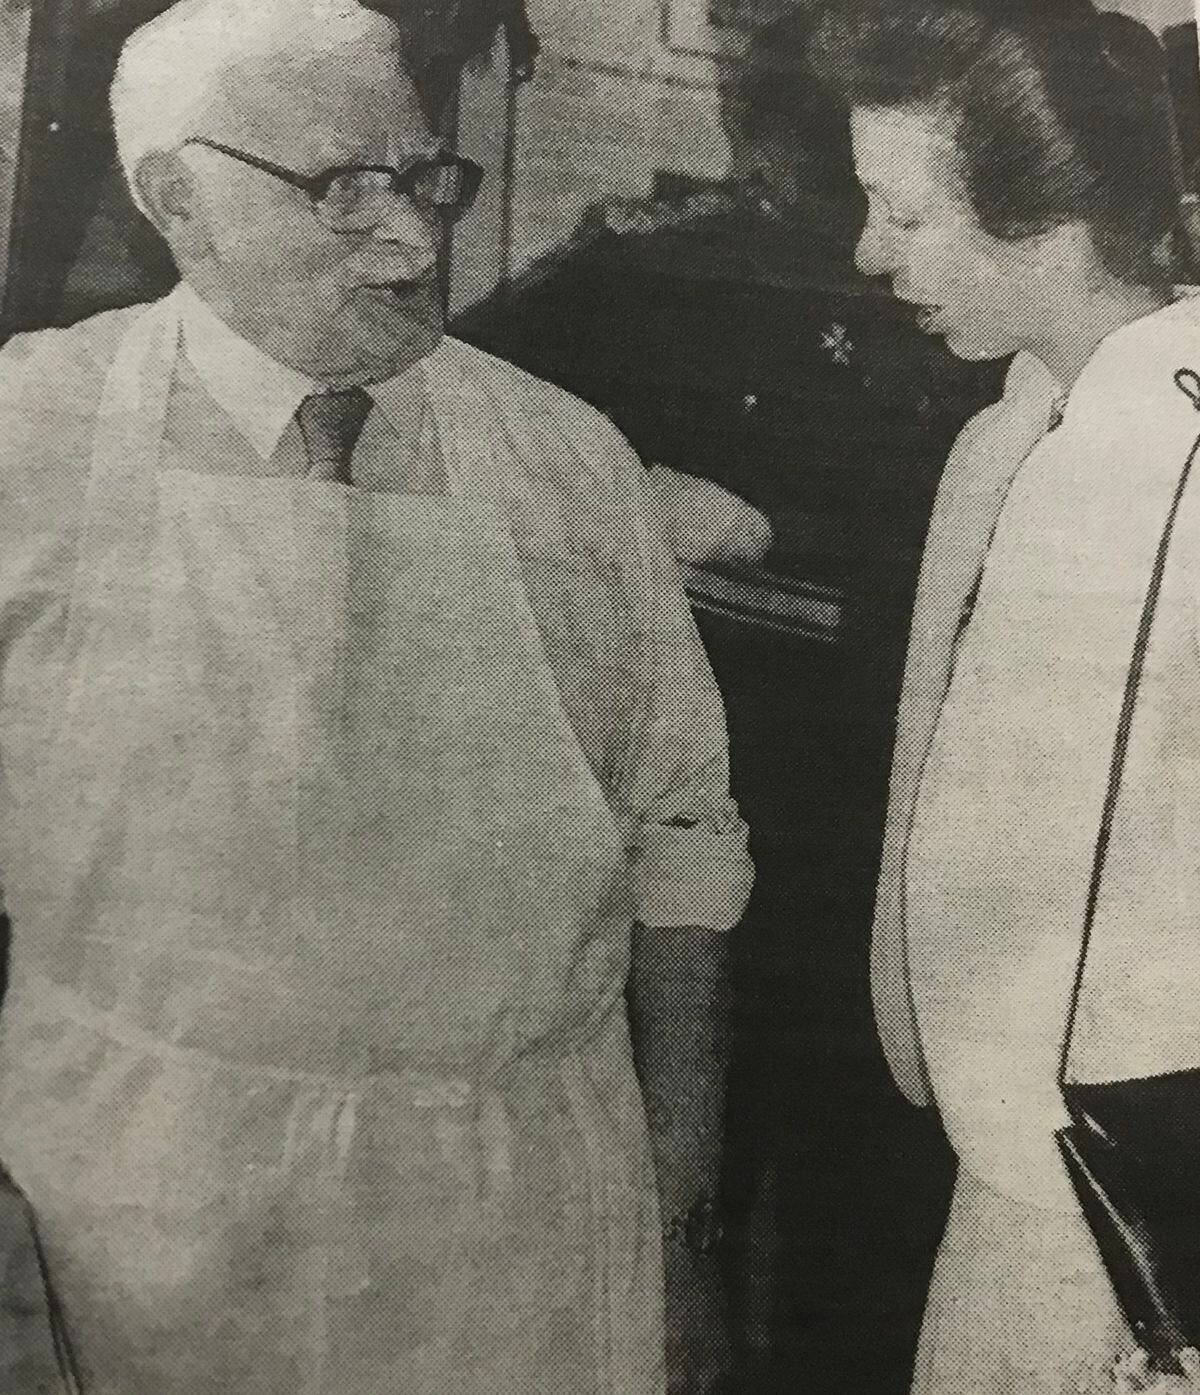 The Princess Royal talks to Frank Egan, who demonstrated the craft of edging leather.